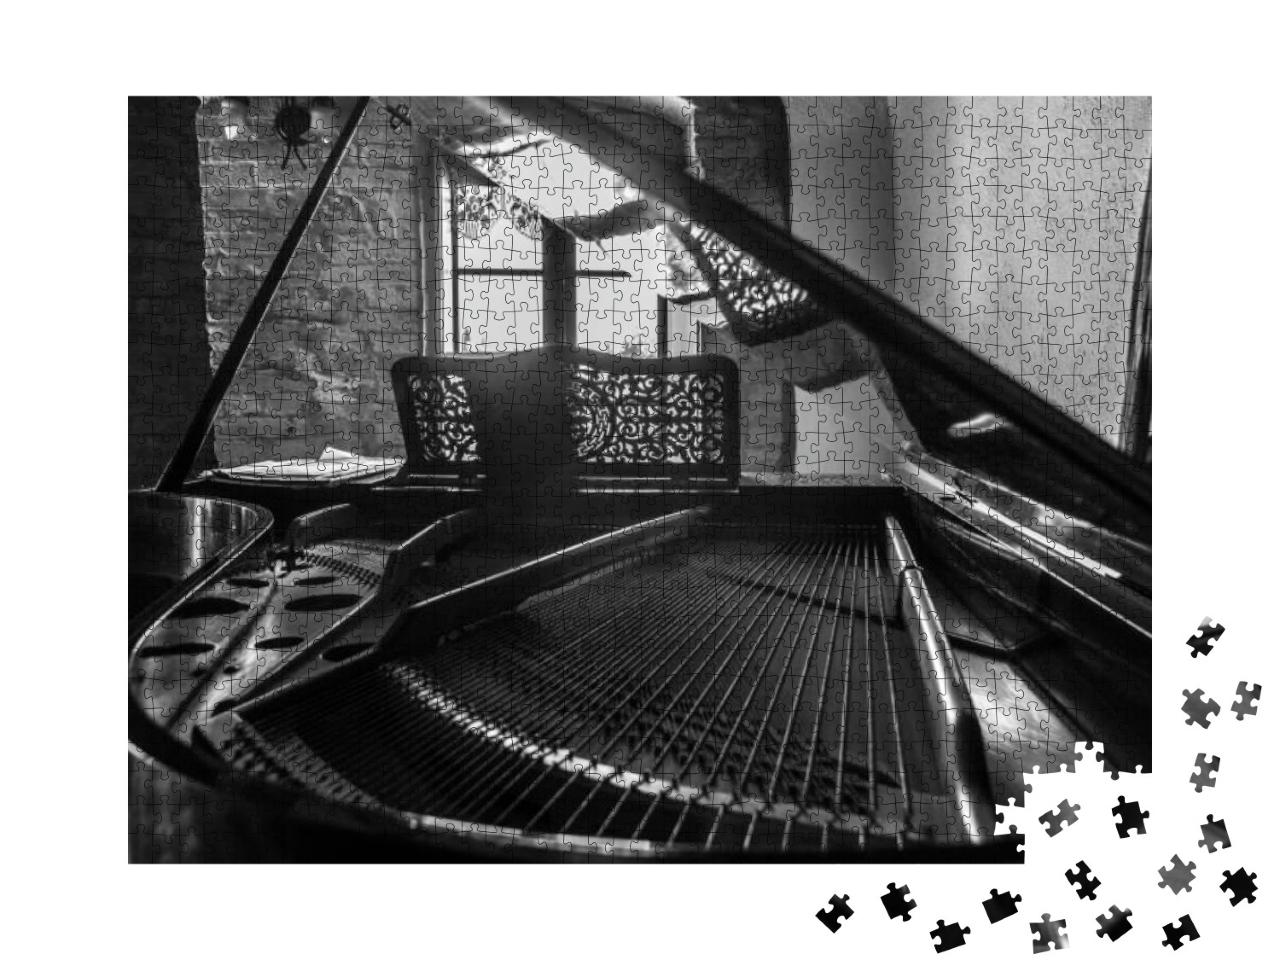 Inside a Grand Piano in an Old Building... Jigsaw Puzzle with 1000 pieces